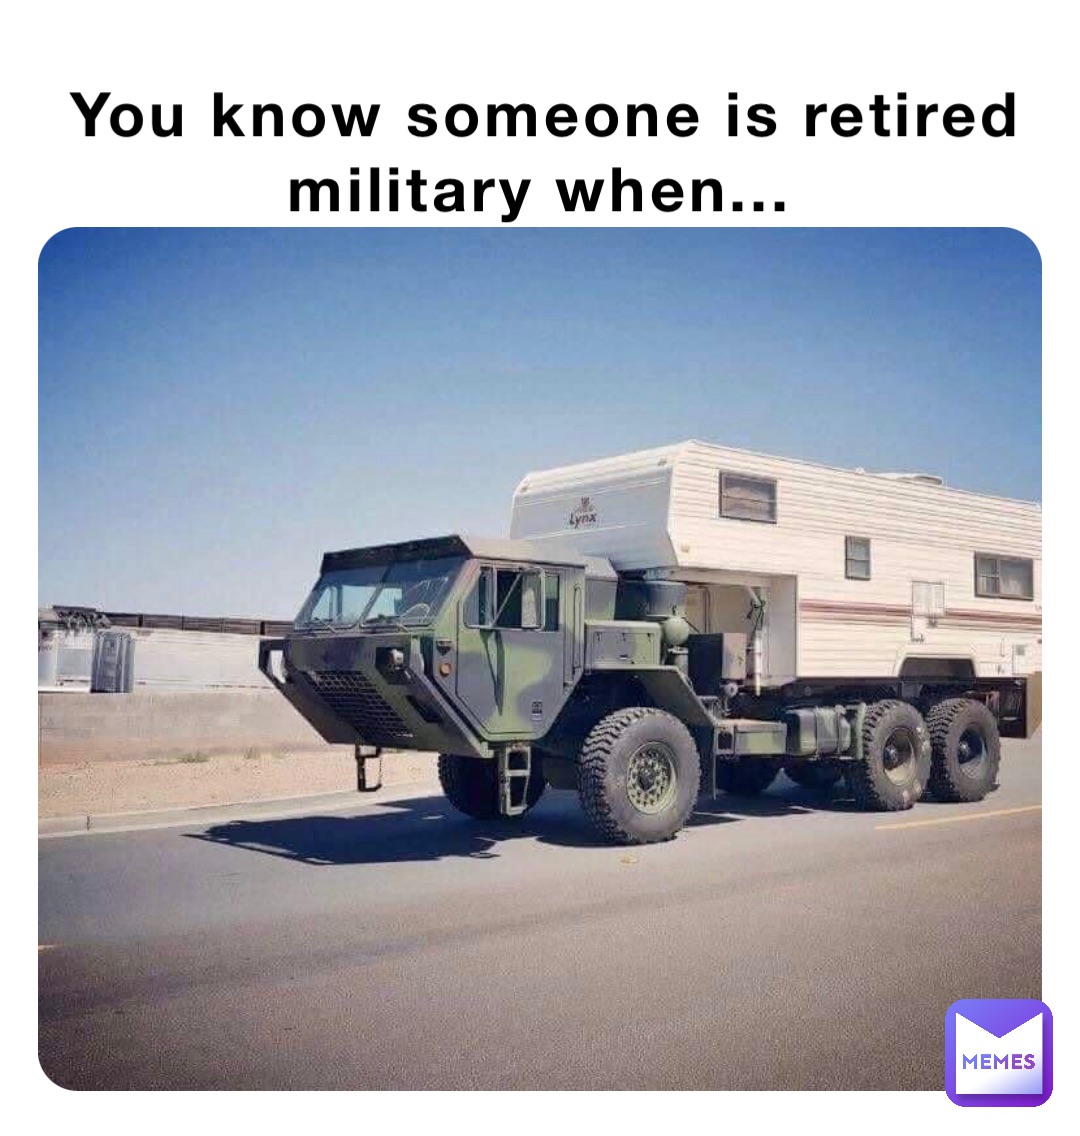 You know someone is retired military when...